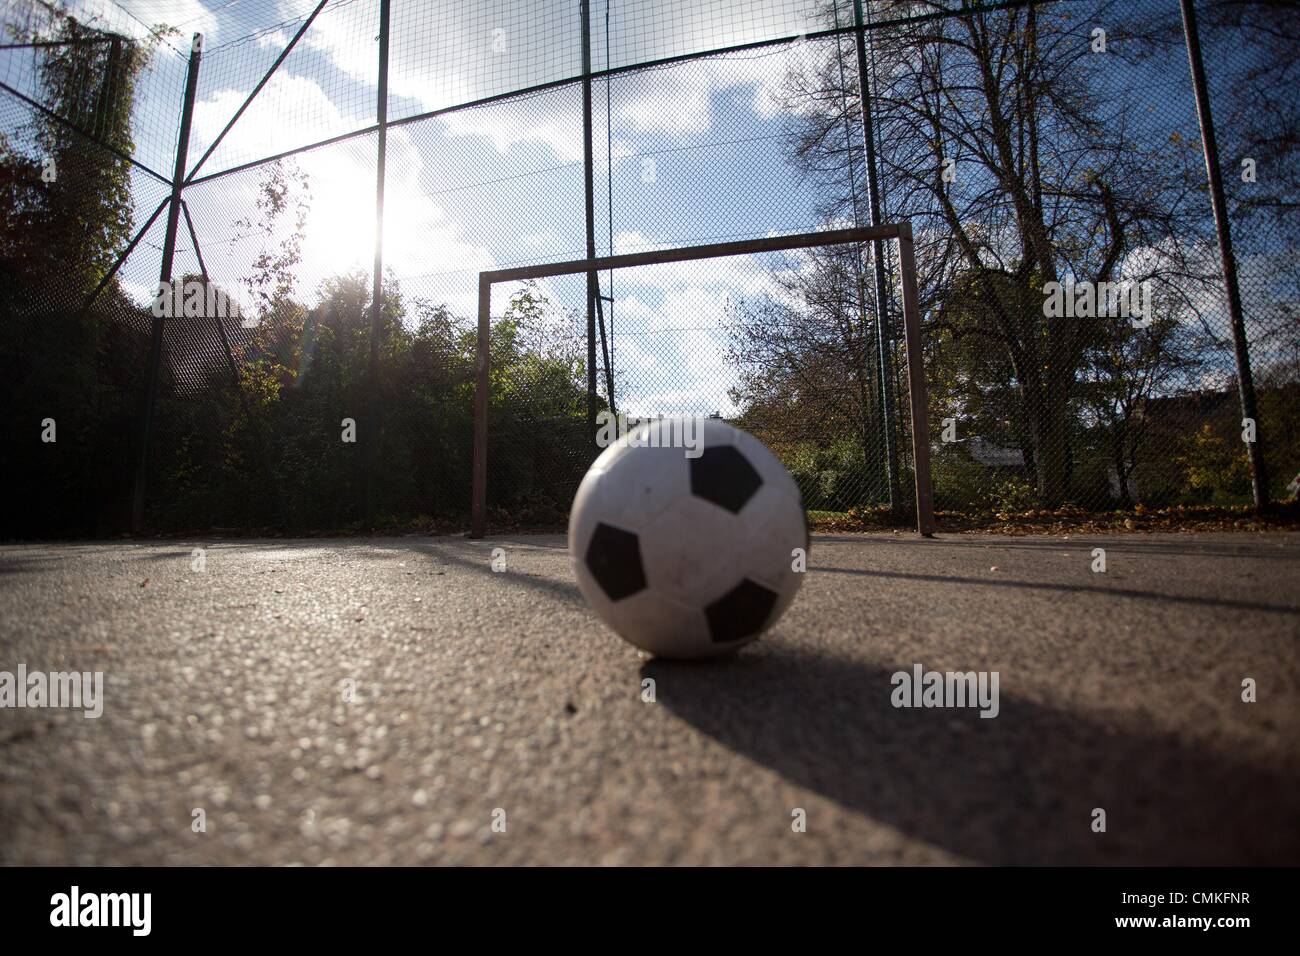 Berlin-Wedding, Germany. 30th Oct, 2013. A ball sits in a soccer cage on the Panke in Berlin-Wedding, Germany, 30 October 2013. Schalke's pro soccer player Kevin-Prince Boateng supposedly learned how to play soccer in this cage. Photo: Joerg Carstensen/dpa/Alamy Live News Stock Photo